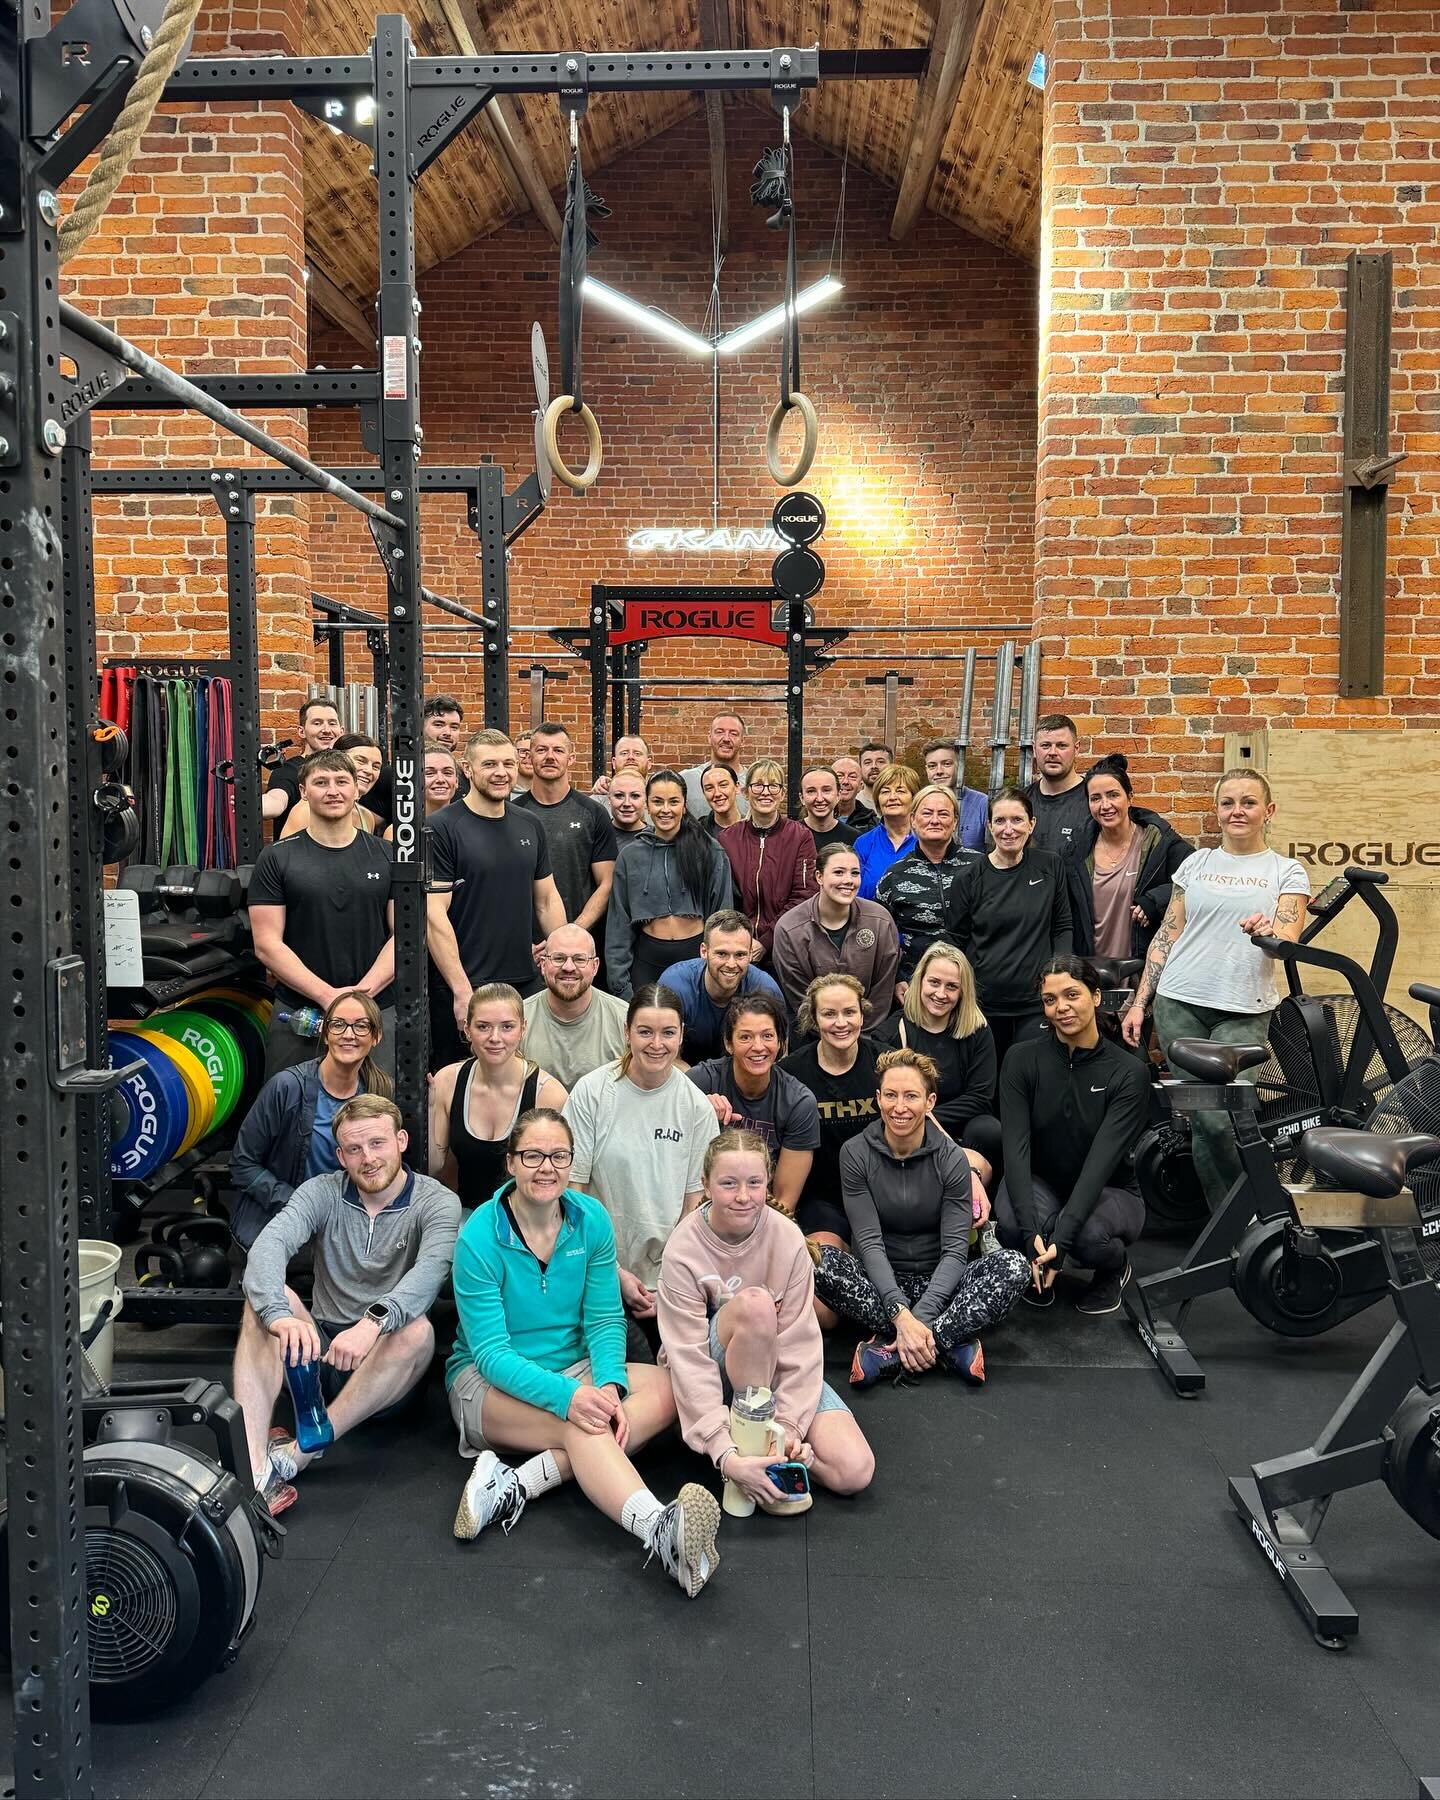 Happy Good Friday! Another bank holiday special this morning across our 8am &amp; 9am Team Training classes.

The team tackled either cleans or front squats for their strength section followed by a play on the CF Classic, Cindy:

10 rounds for time:
